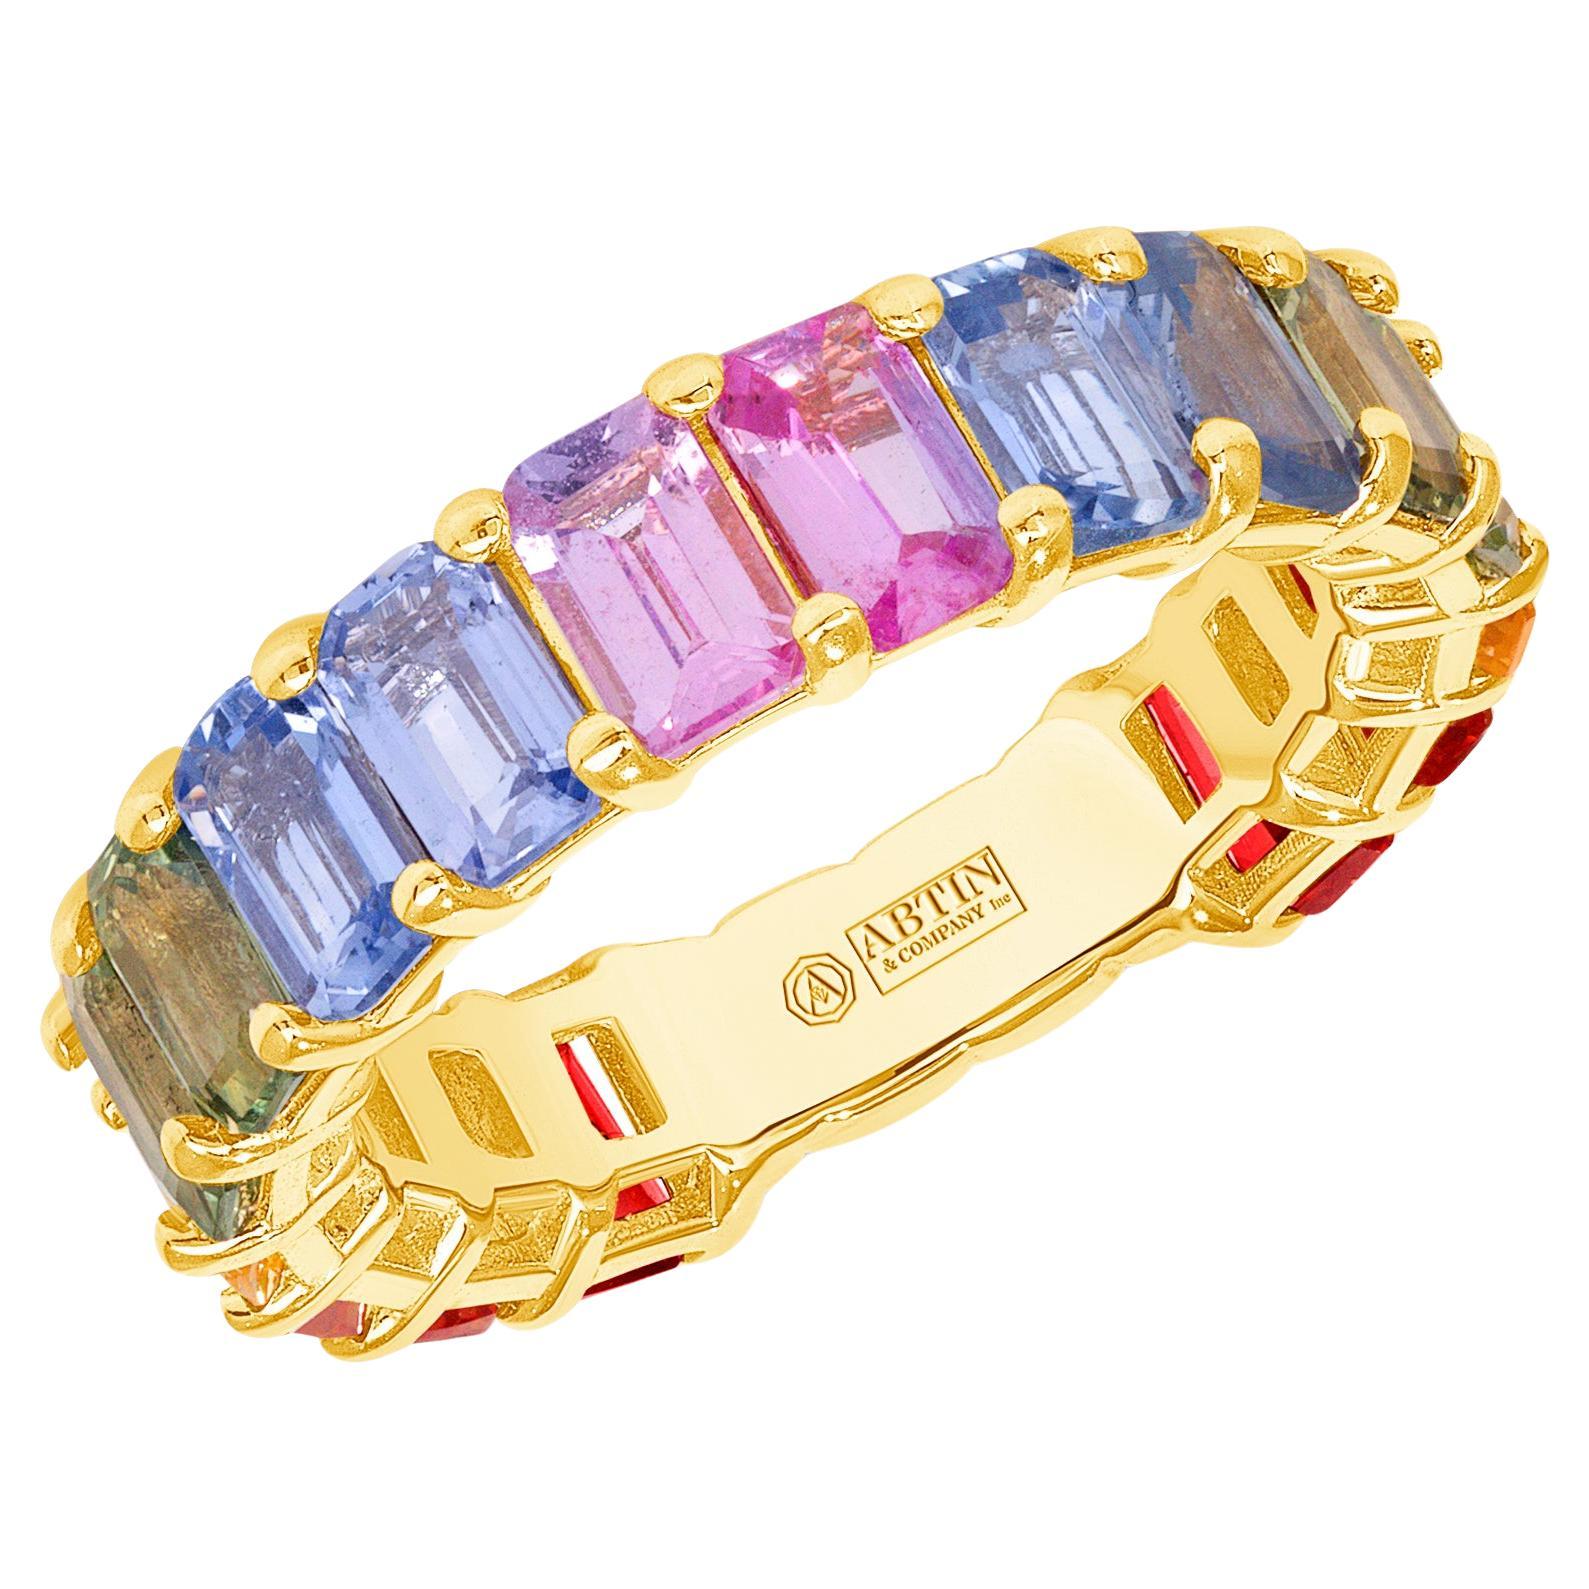 Get all the colors of the rainbow in this 14K gold emerald-cut multicolored sapphire rainbow ring. It's a singular piece that stands out alone and pairs beautifully with other rings glittering in all hues of the rainbow. A unique and classy piece,